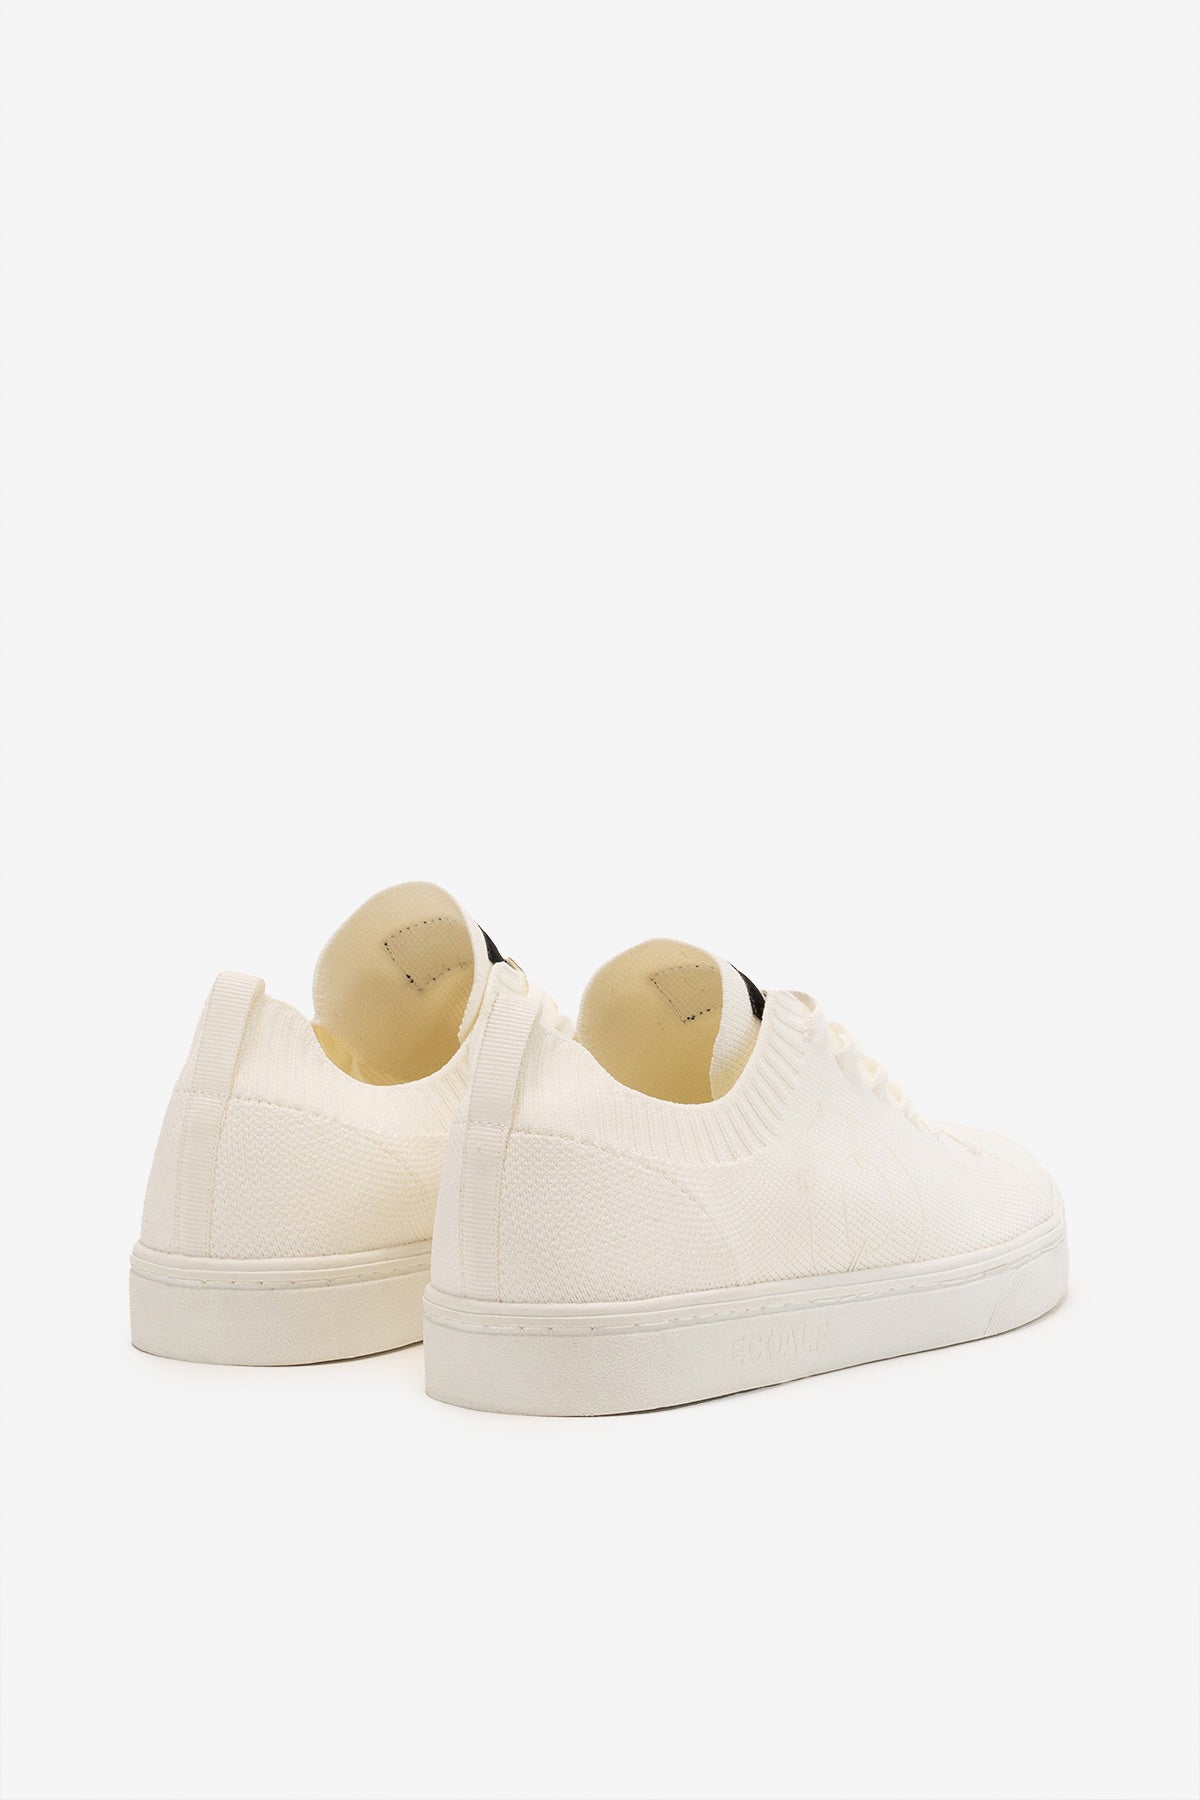 WHITE JERSEY TRAINERS